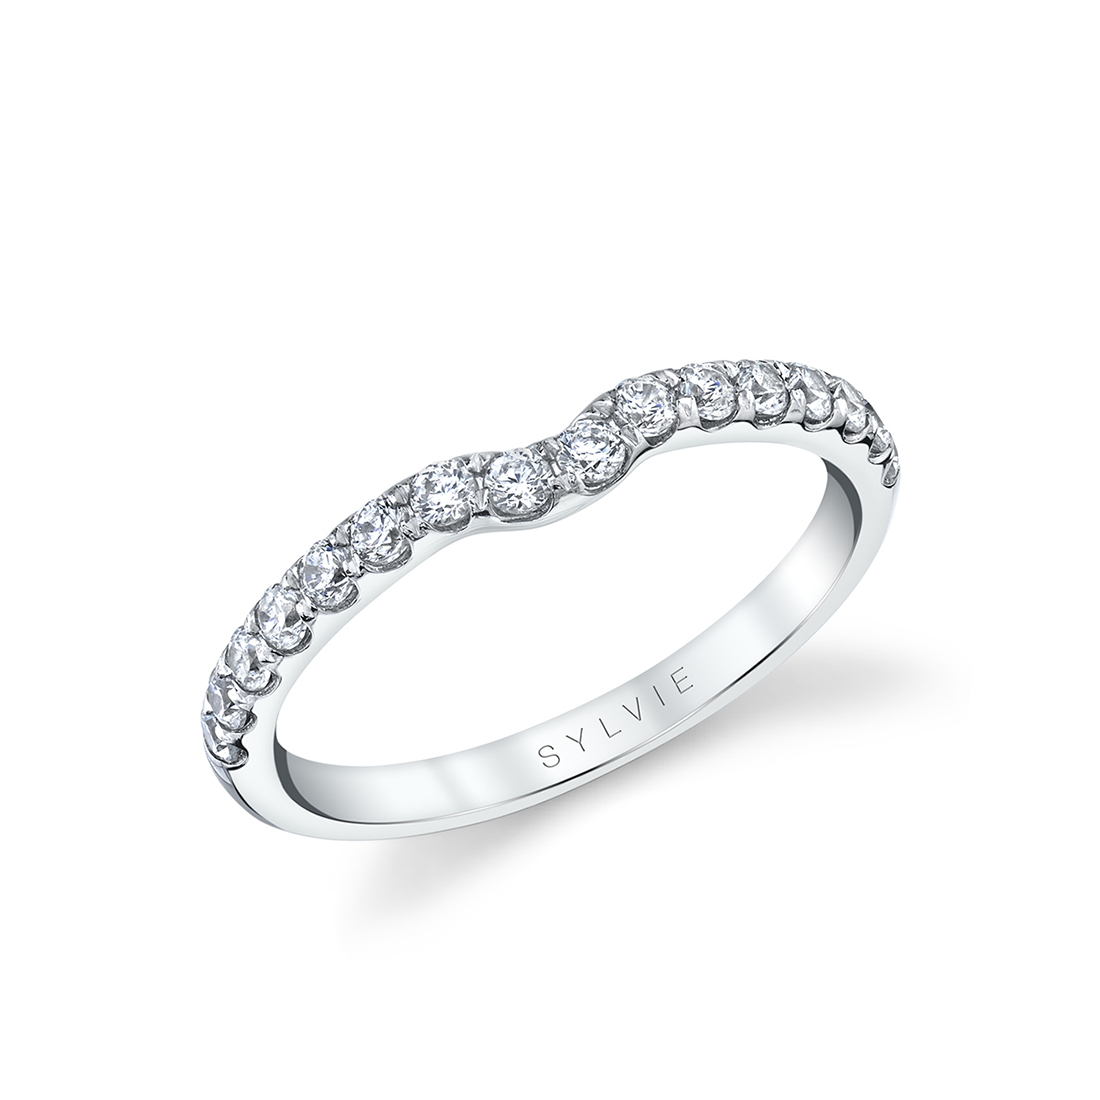 Profile Image of a Hidden Halo Ring in White Gold